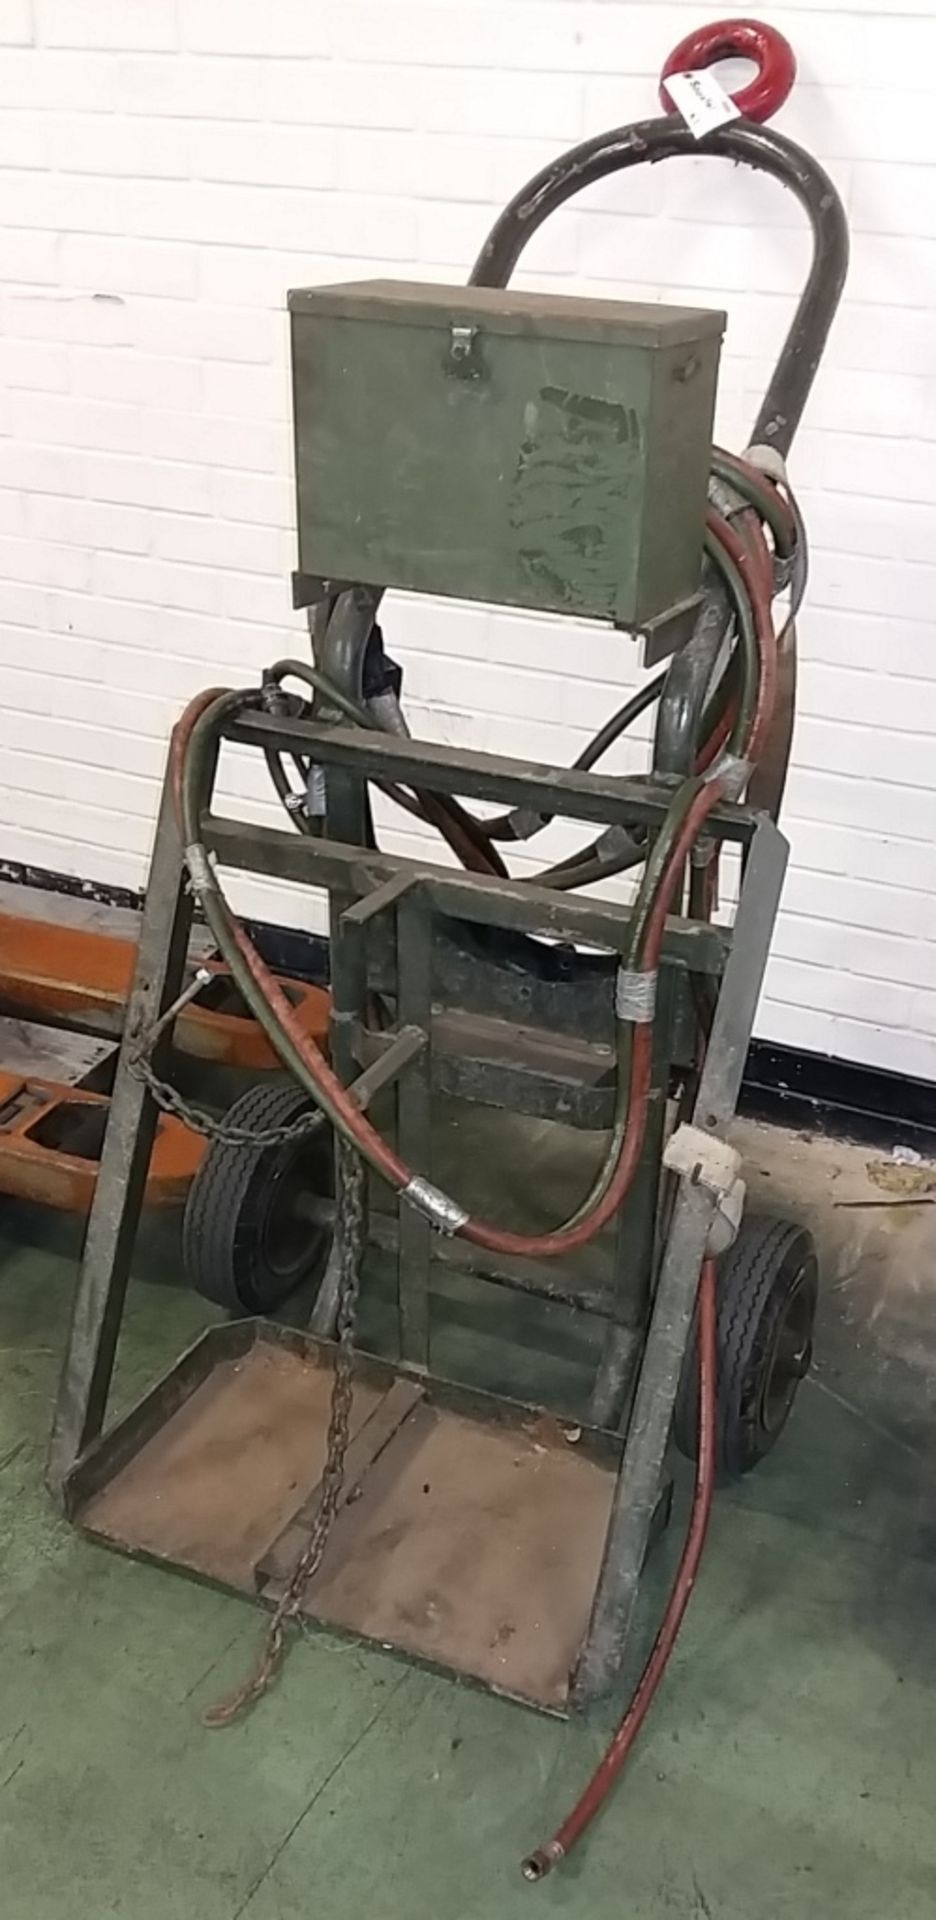 Welding Trolley with hose